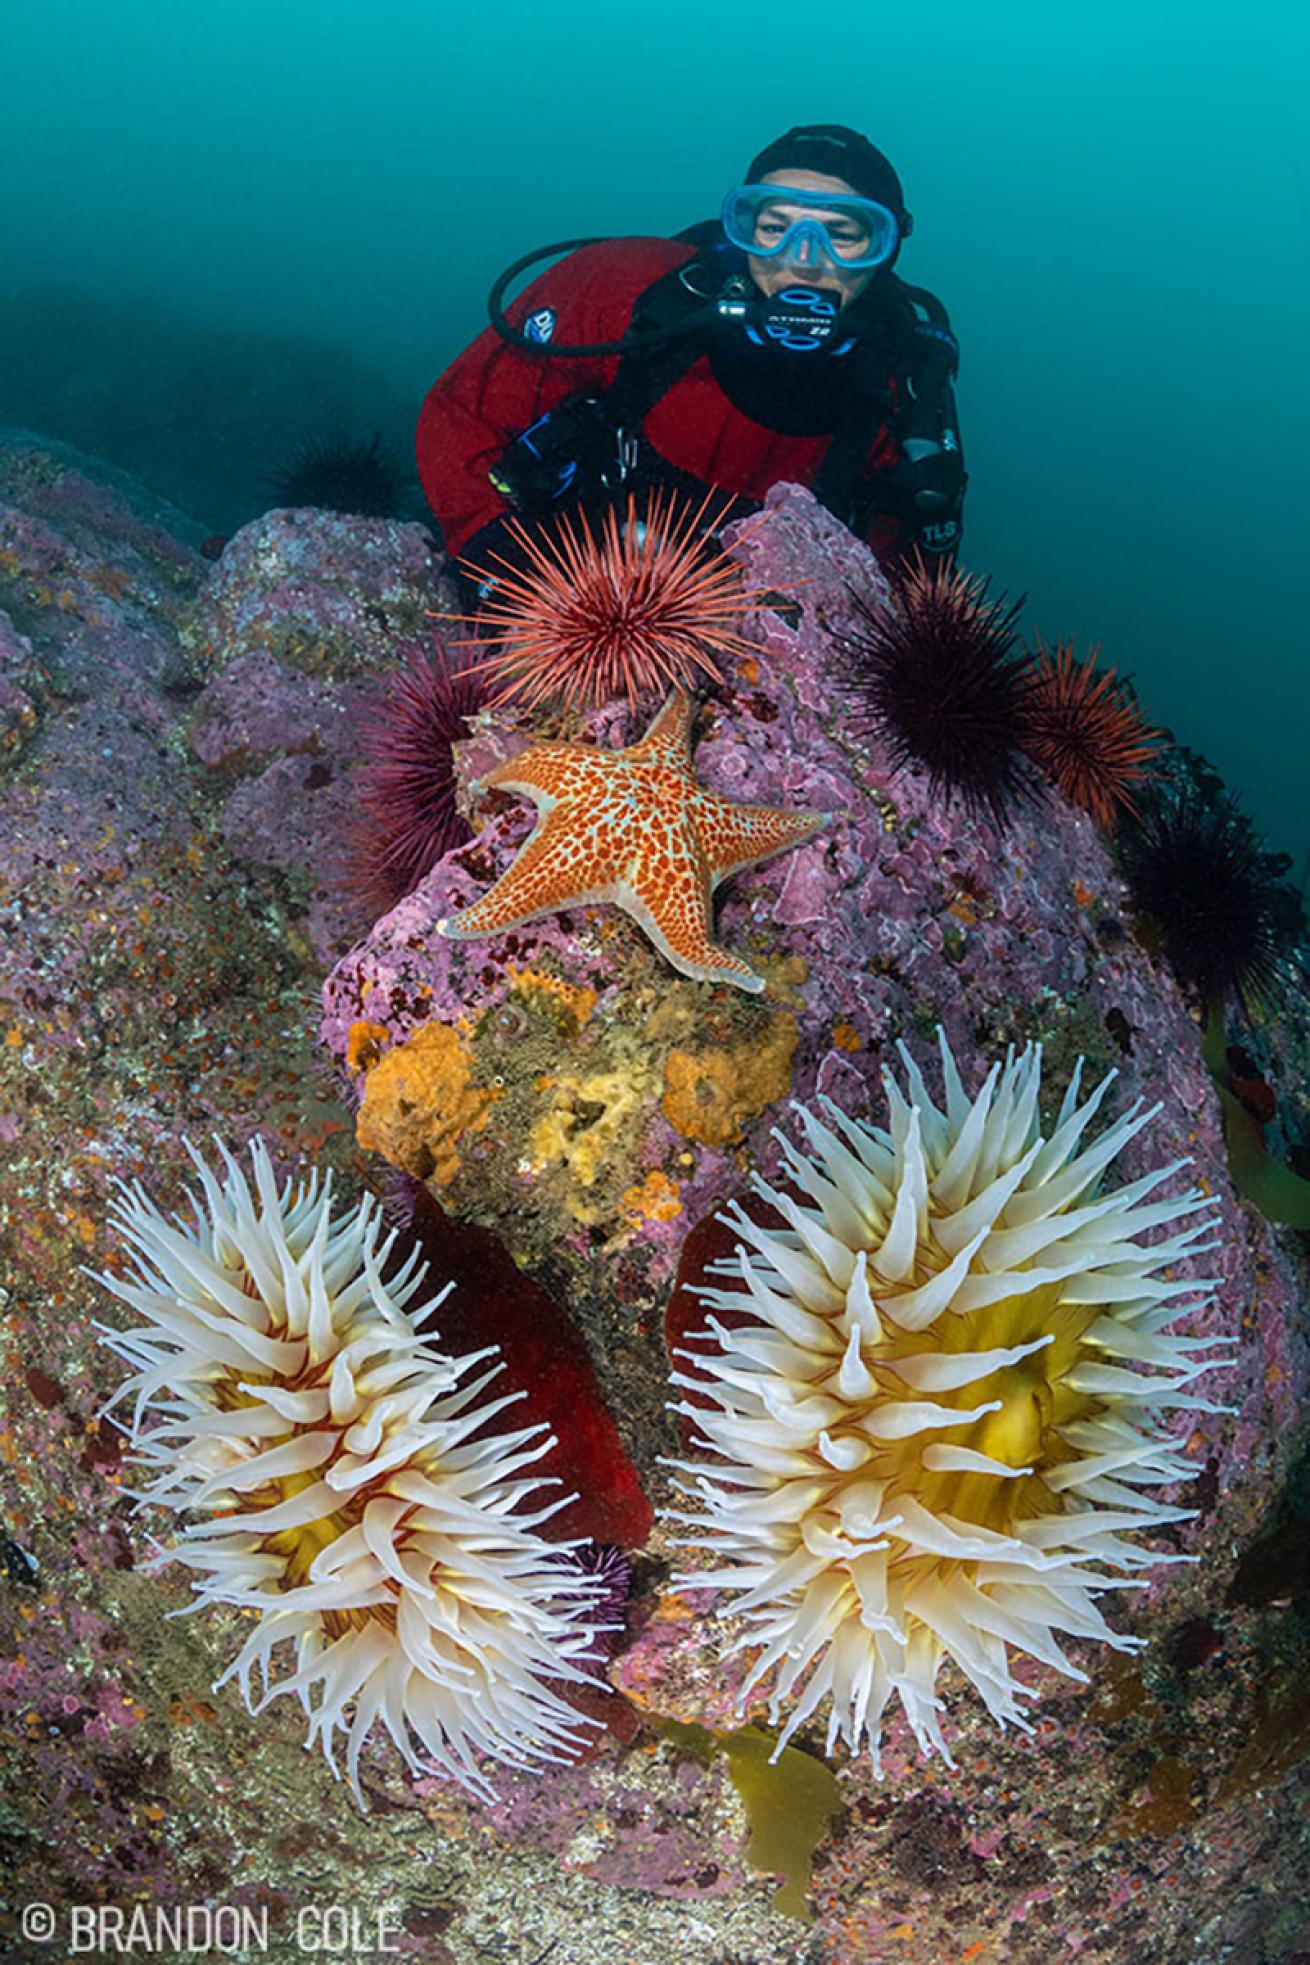 Sea star and diver with giant anemones